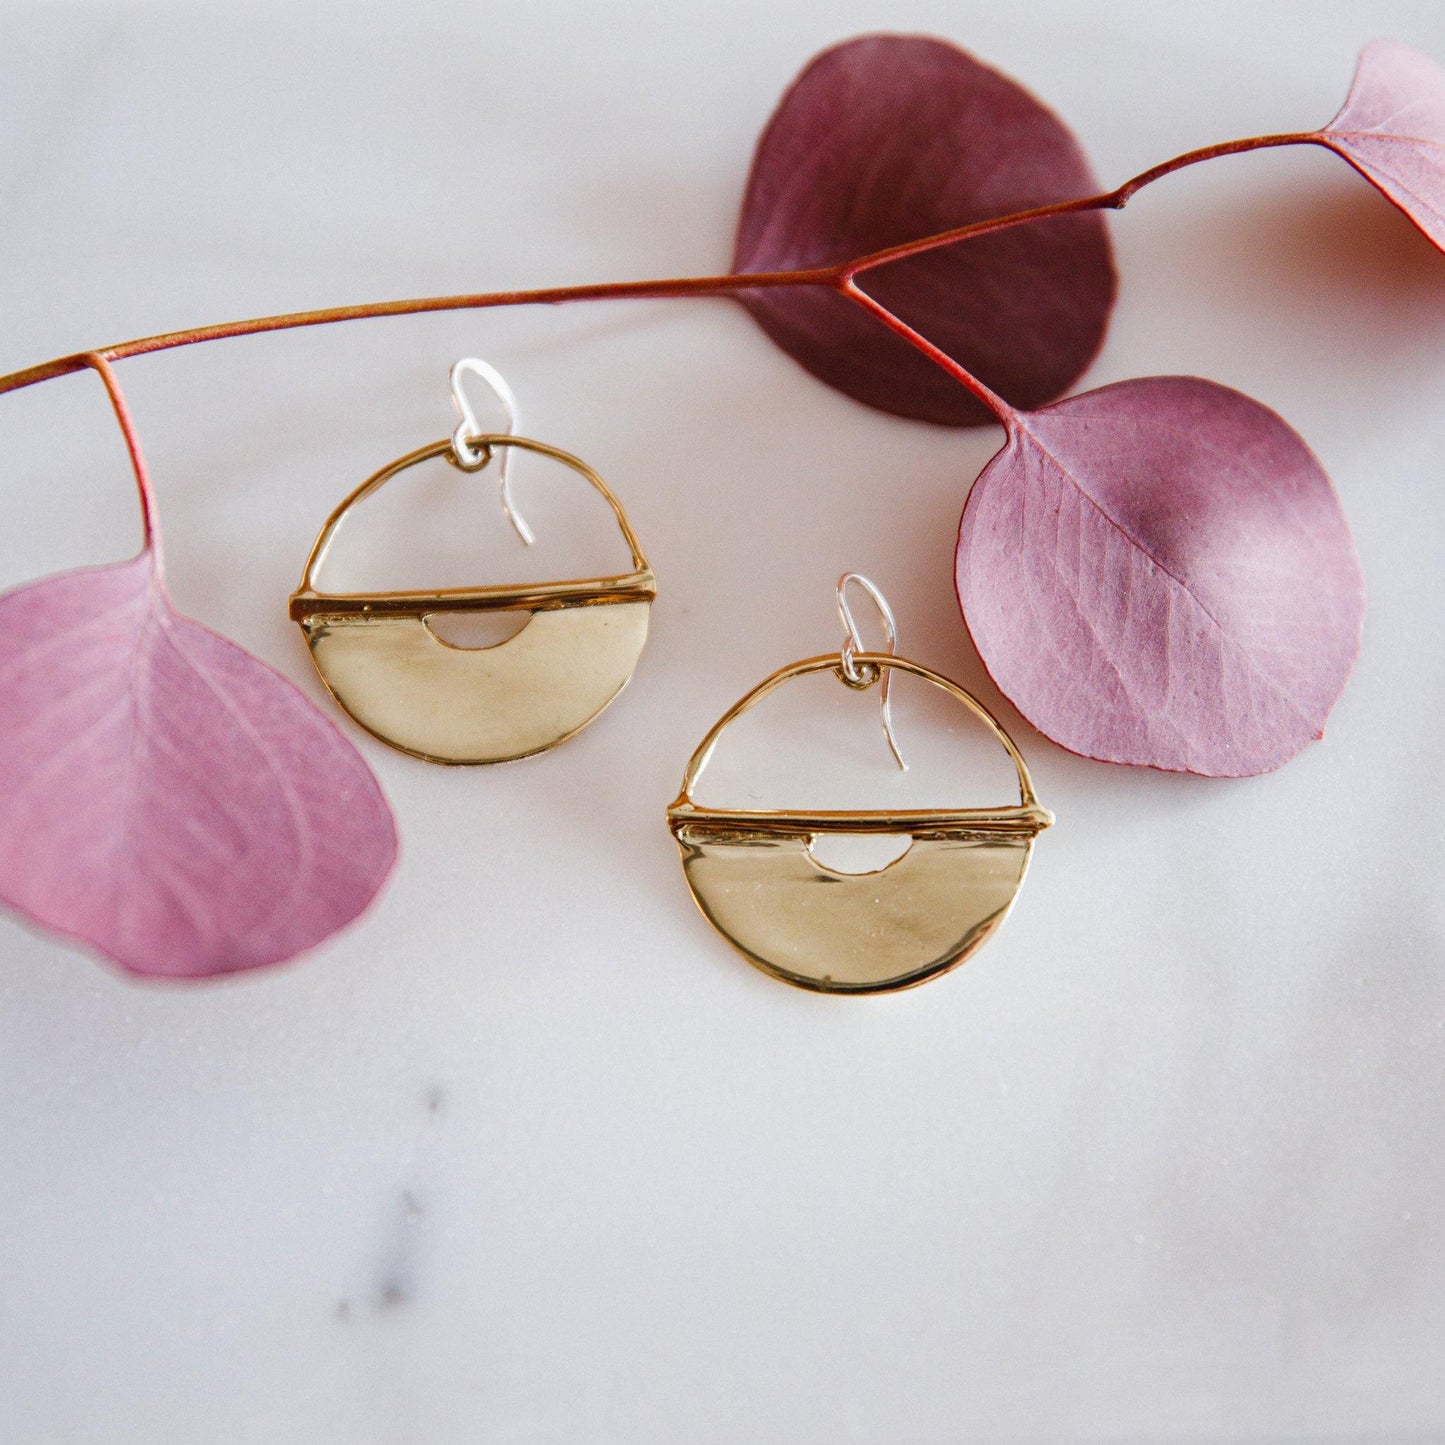 Gold Hoop Earrings - Made of Brass and Sterling